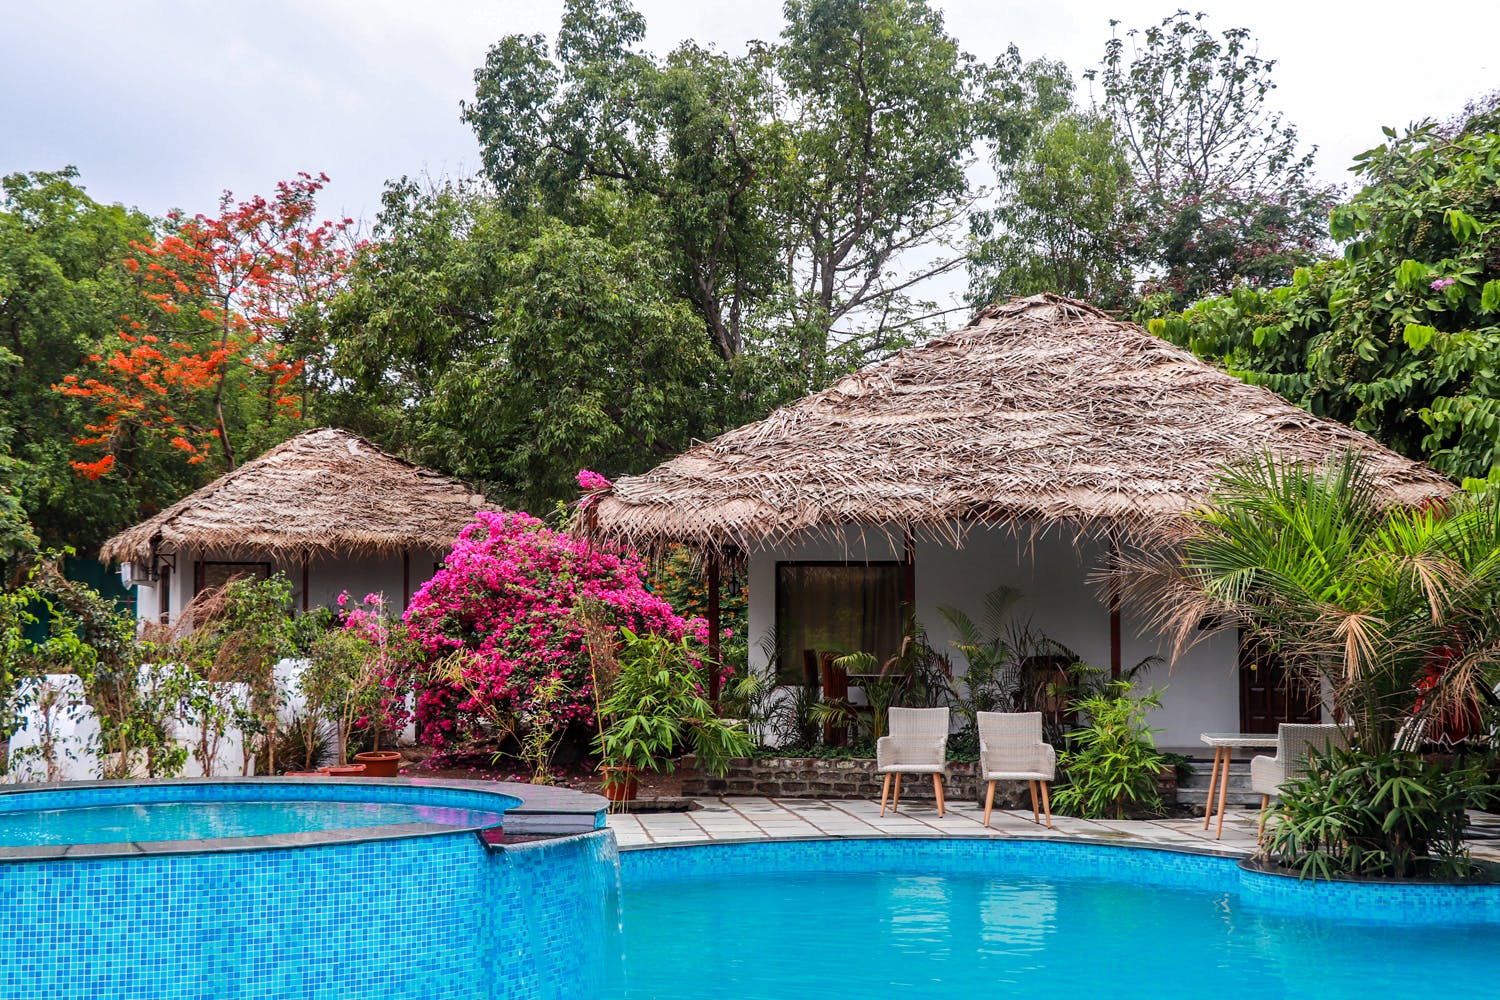 Property,Swimming pool,Resort,House,Real estate,Building,Vacation,Cottage,Thatching,Eco hotel